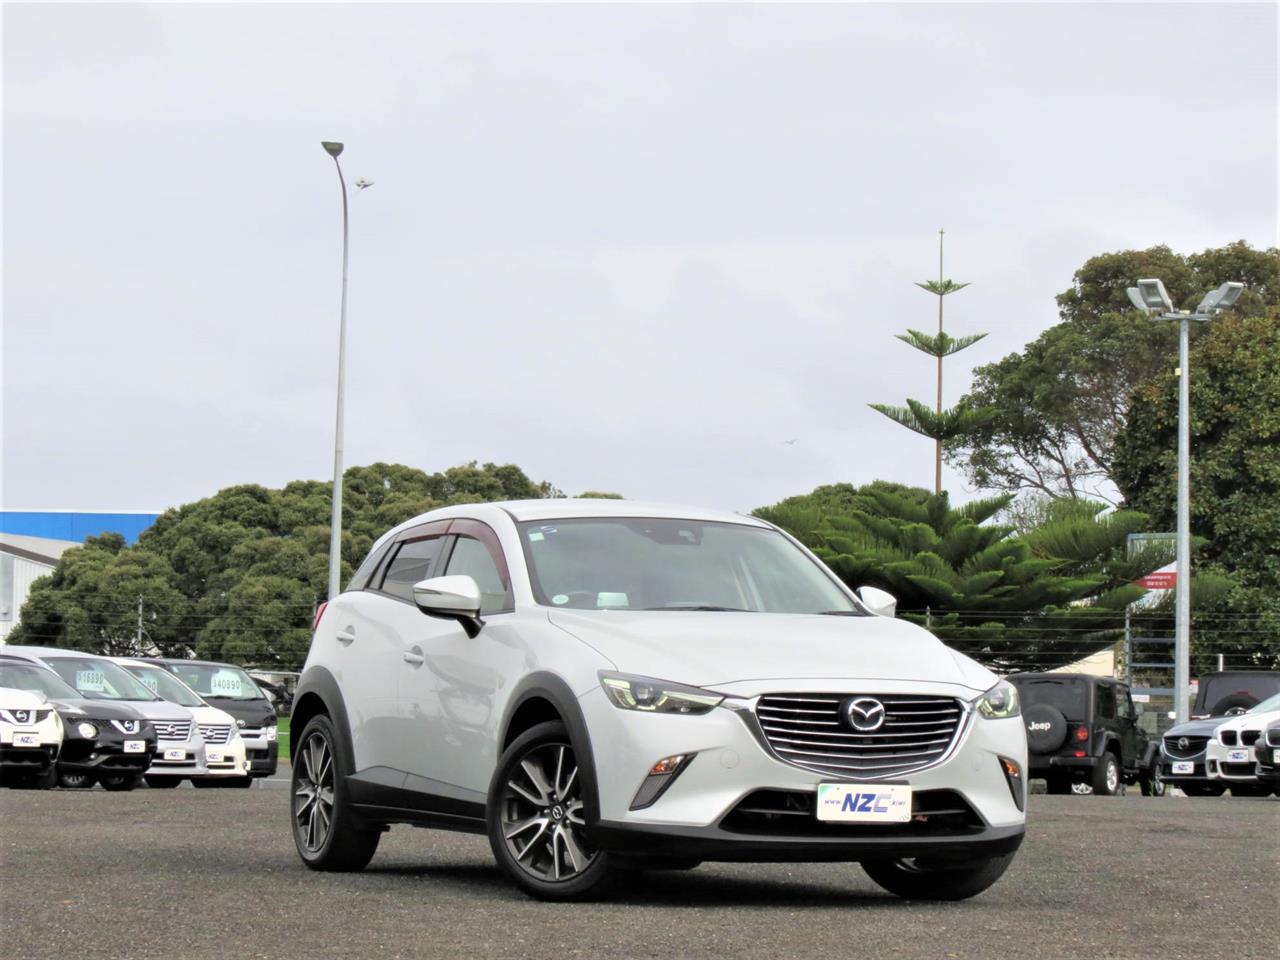 2015 Mazda CX-3 only $77 weekly